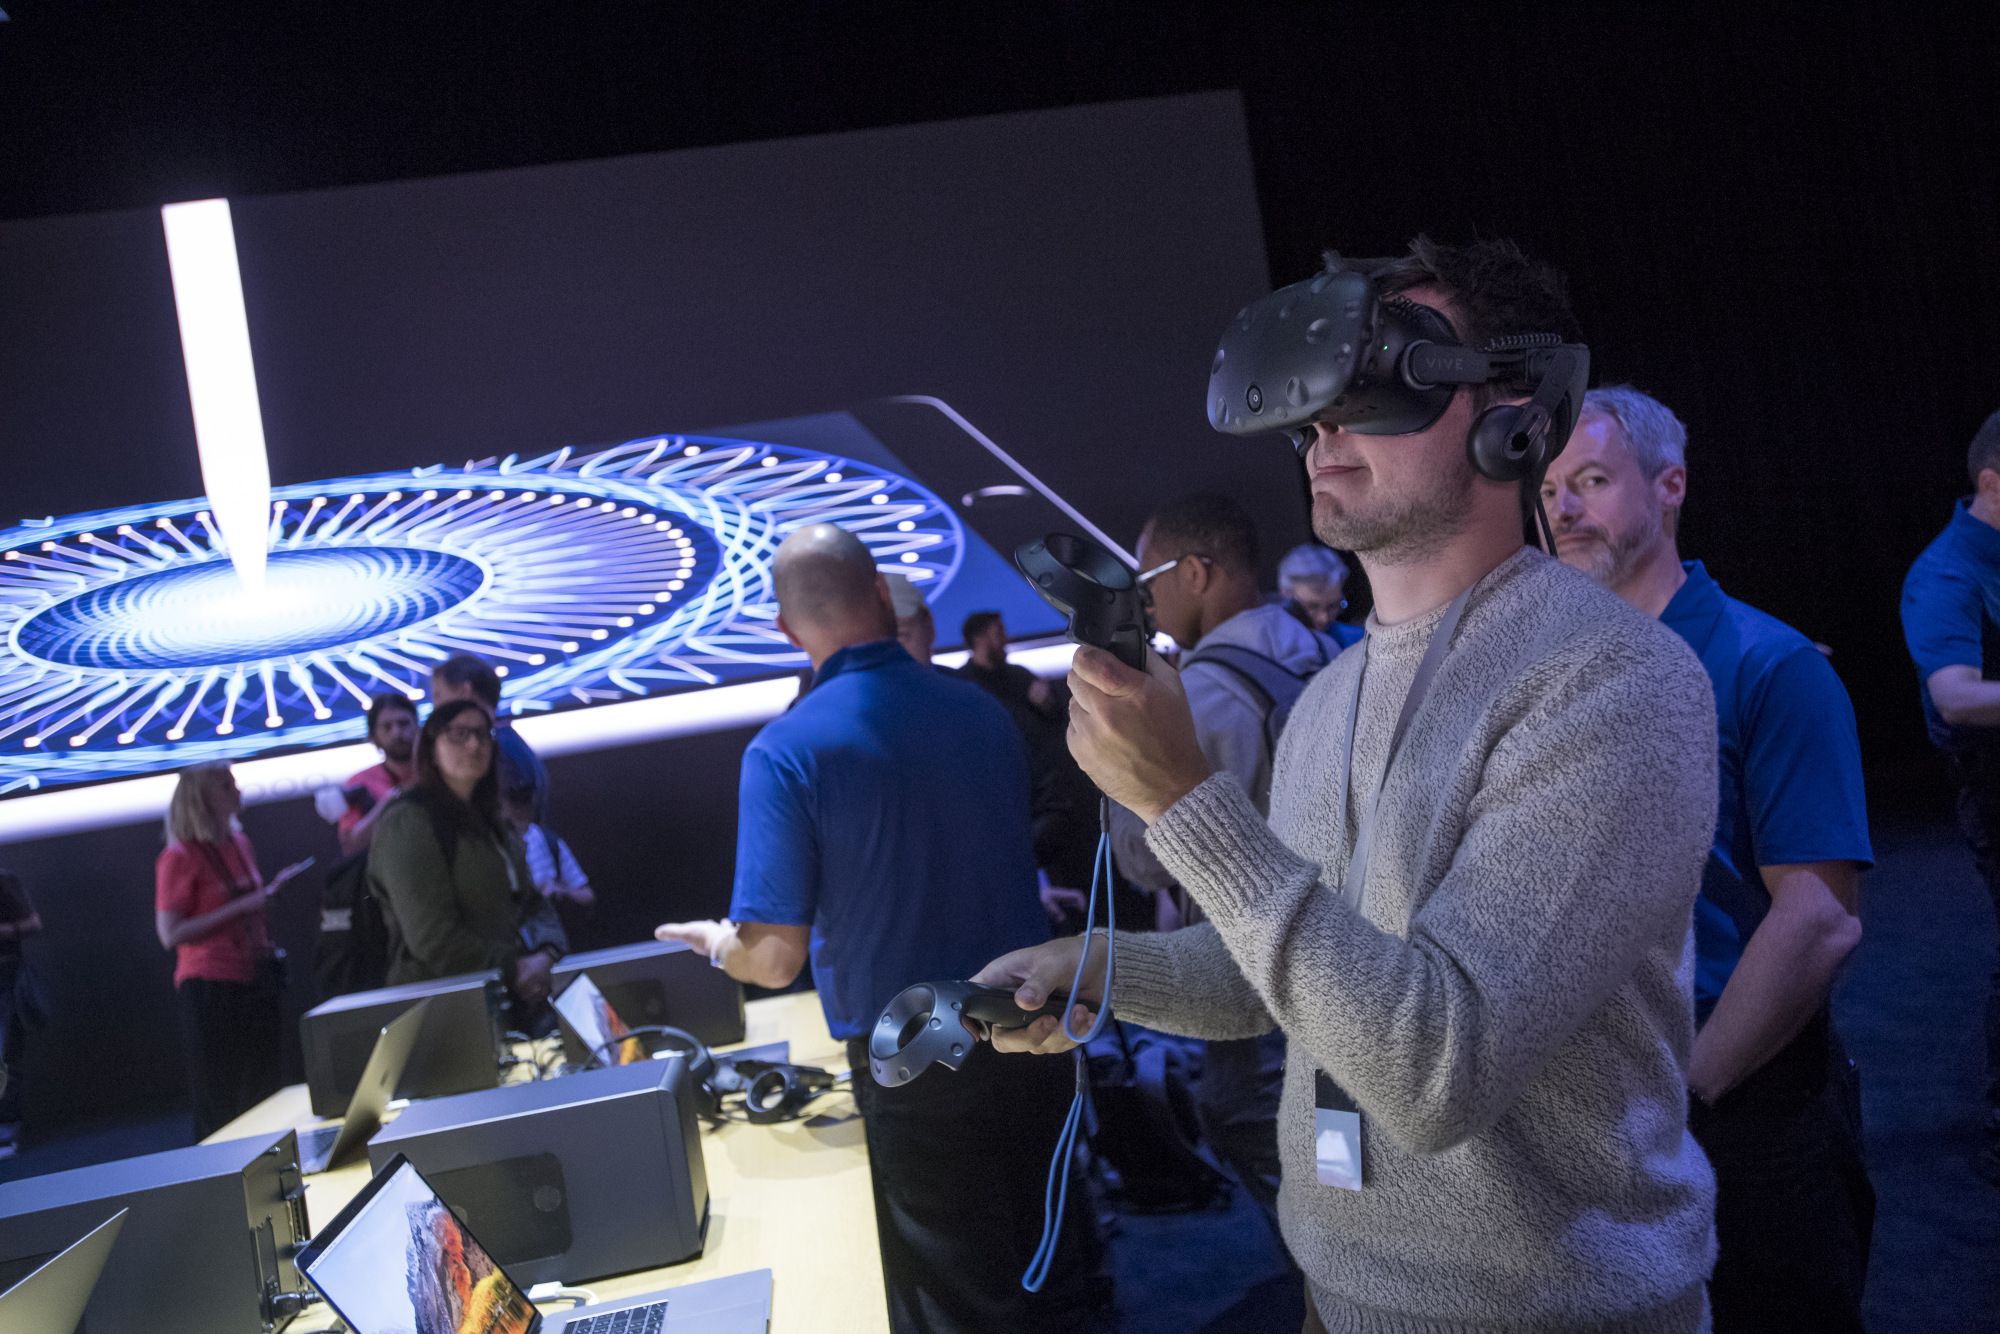 An attendee wears a HTC&nbsp;Vive virtual reality headset during the Apple Worldwide Developers Conference in 2017.